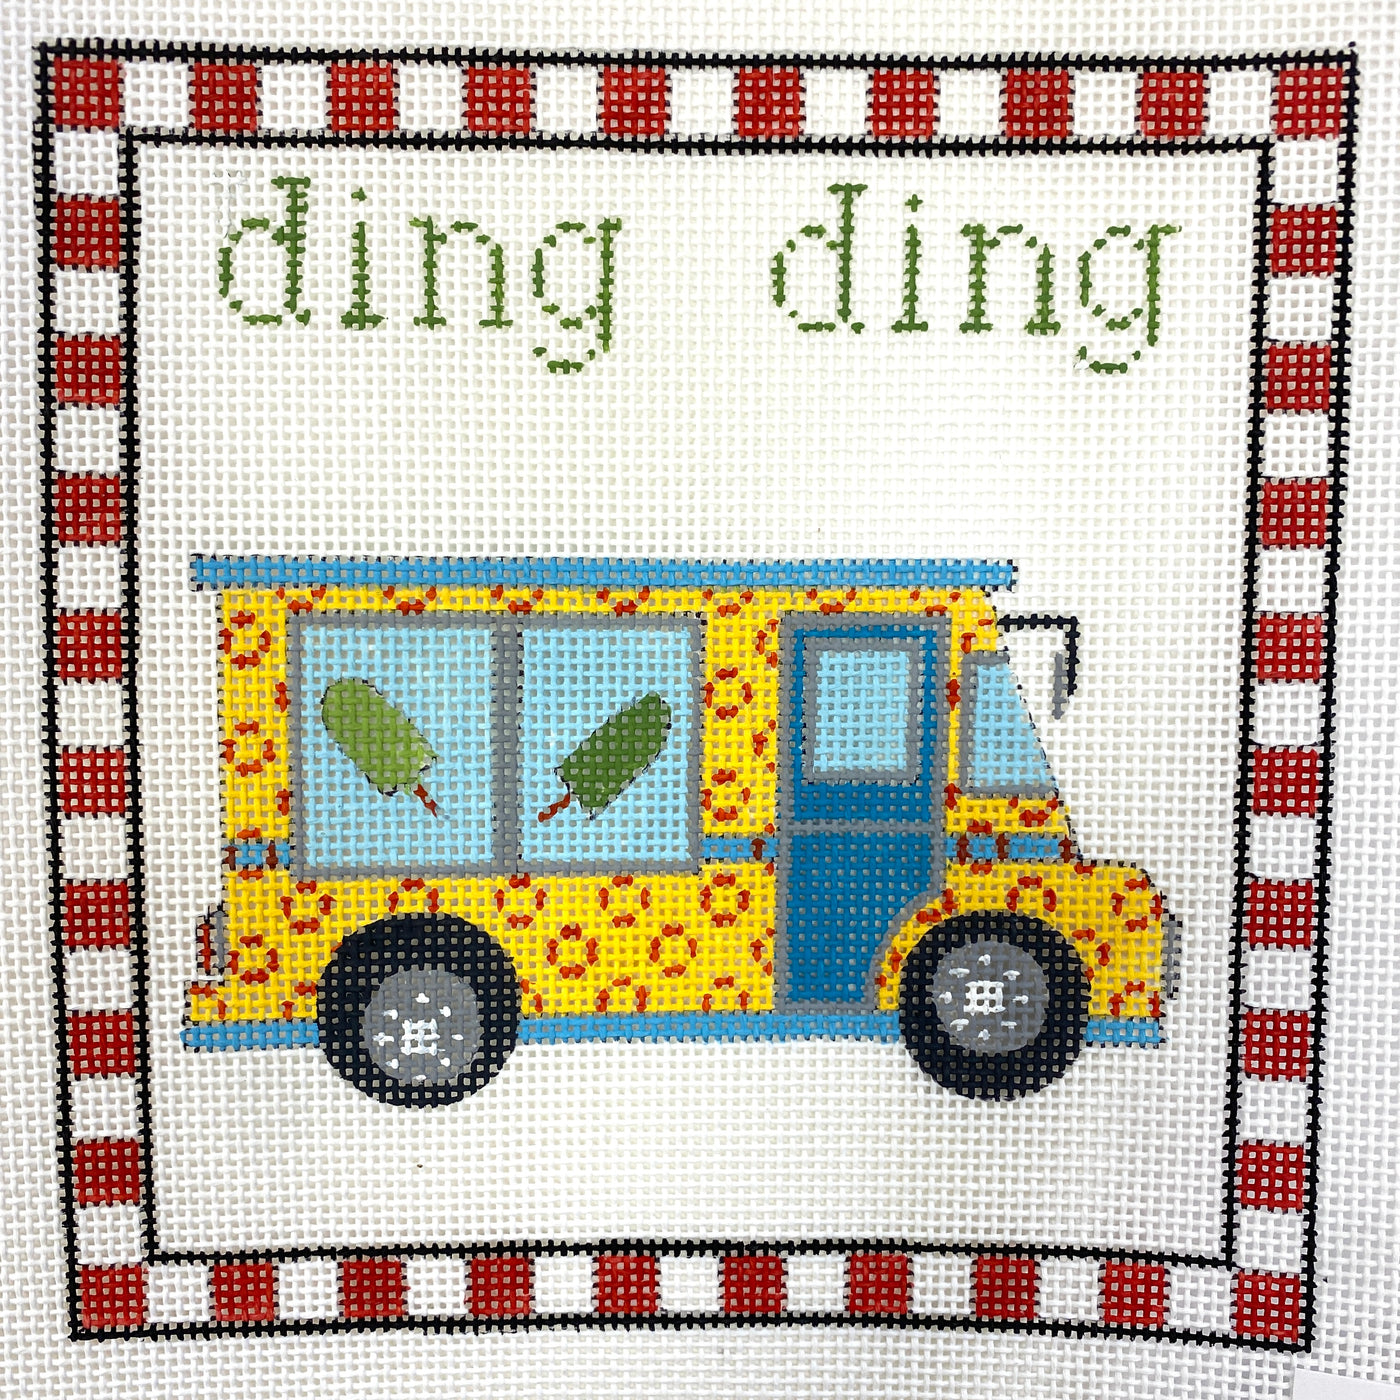 Ding Ding Ice Cream Truck Needlepoint Canvas